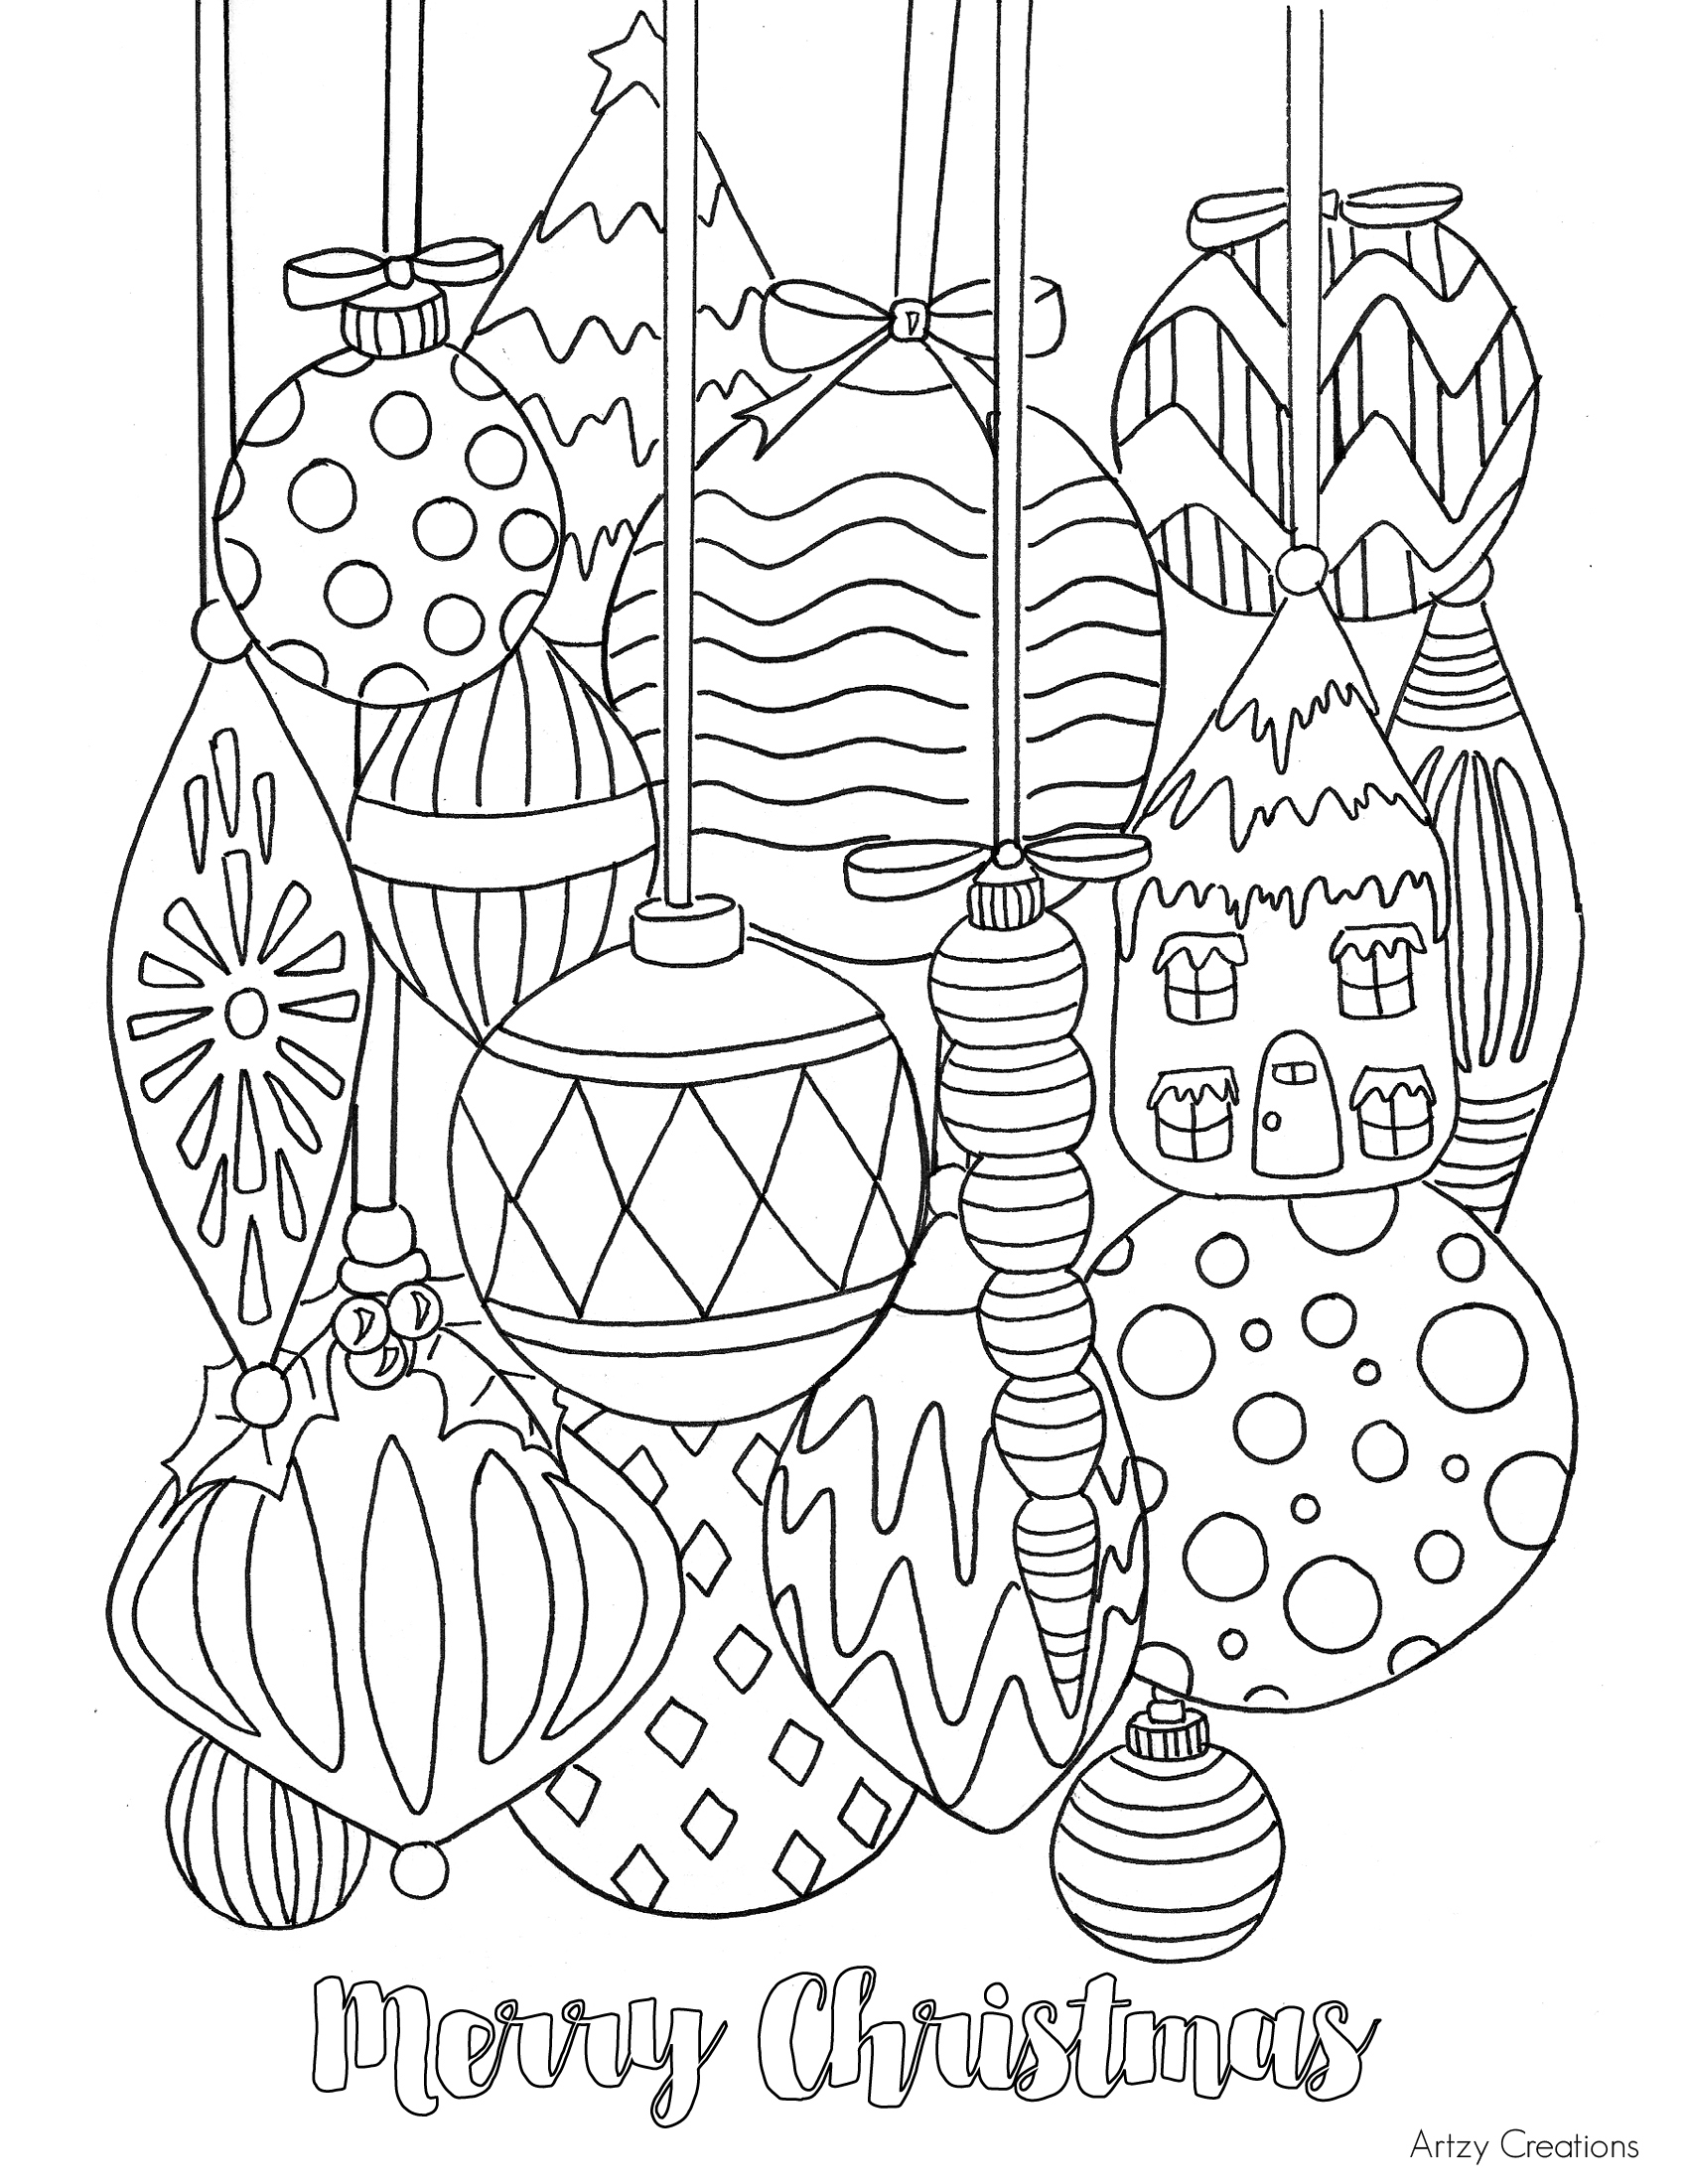 Free Christmas Ornament Coloring Page - Tgif - This Grandma Is Fun - Free Printable Ornaments To Color